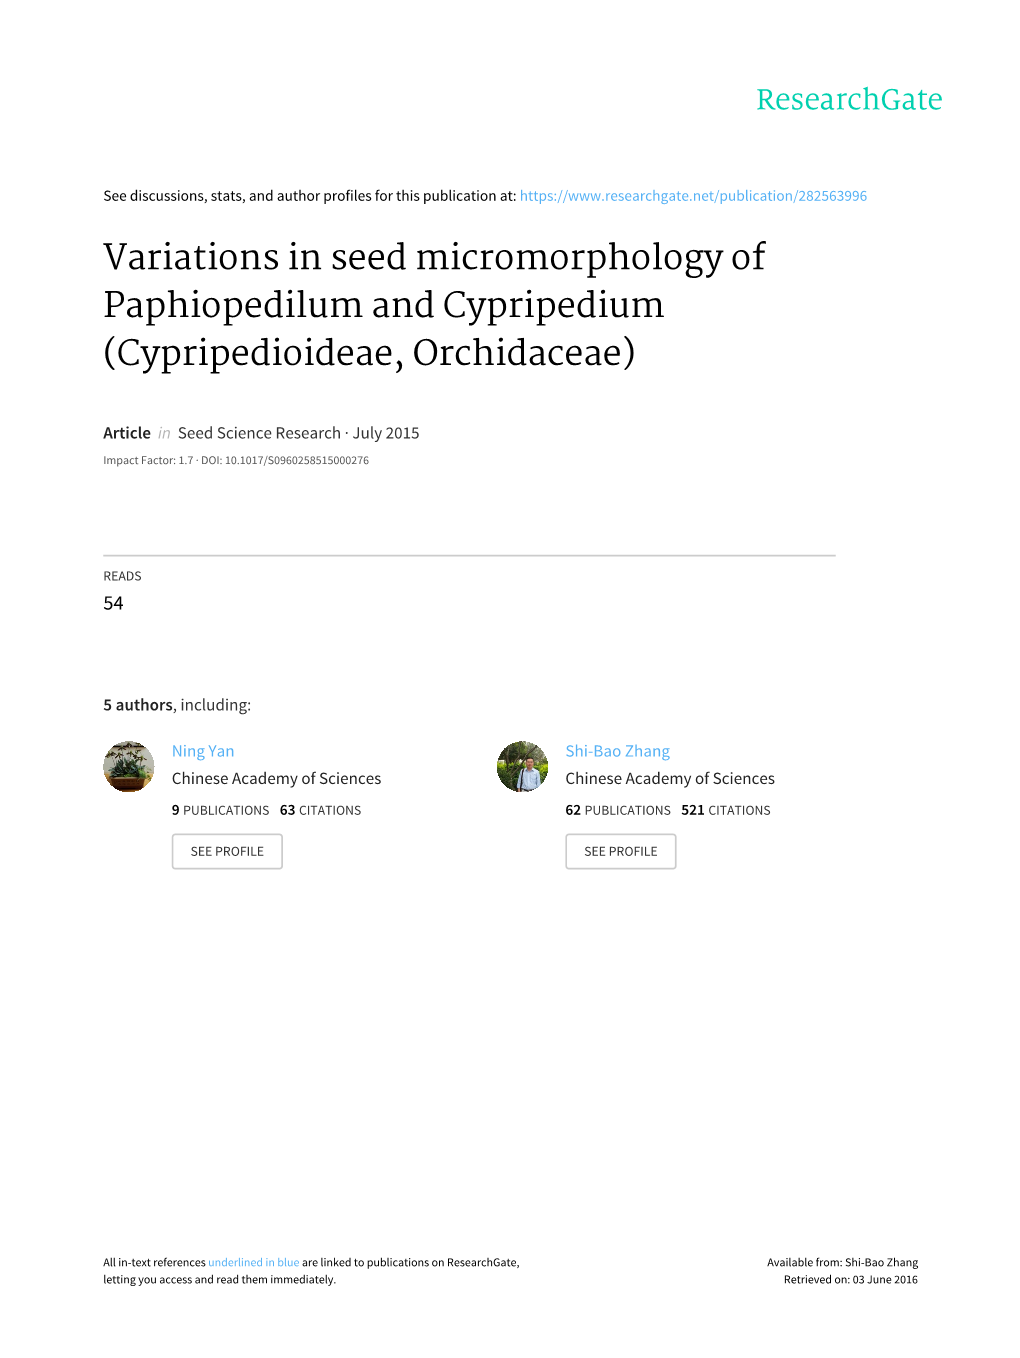 Variations in Seed Micromorphology of Paphiopedilum and Cypripedium (Cypripedioideae, Orchidaceae)